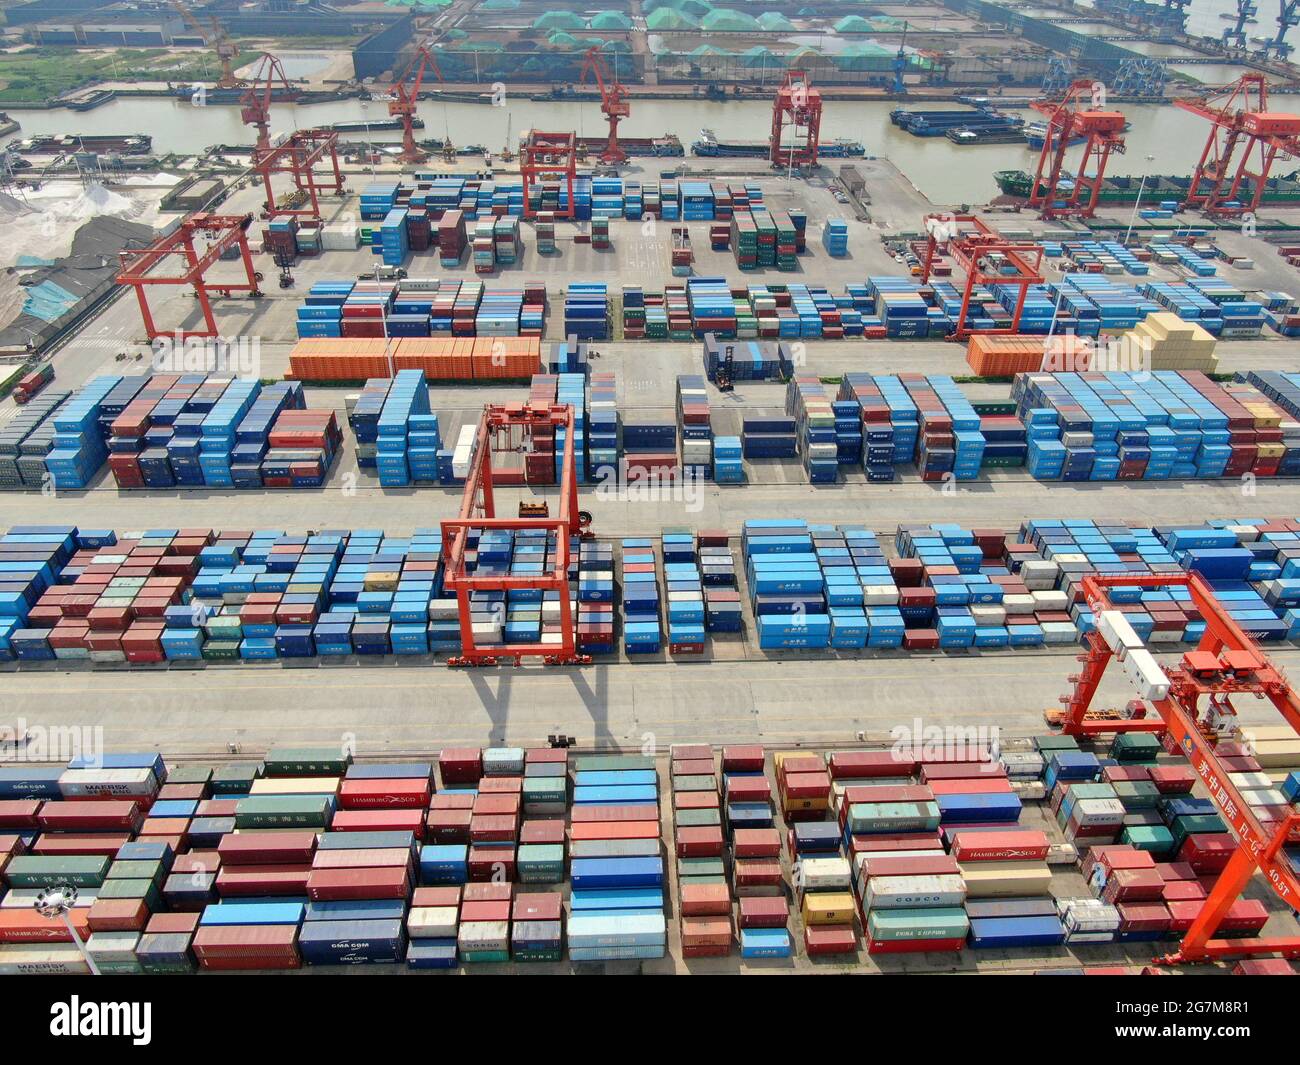 Nantong, Nantong, China. 15th July, 2021. The busy container terminal of  Suzhong International in Rugao Port taken on July 15, 2021. According to  the information provided by the Transportation Bureau of Nantong